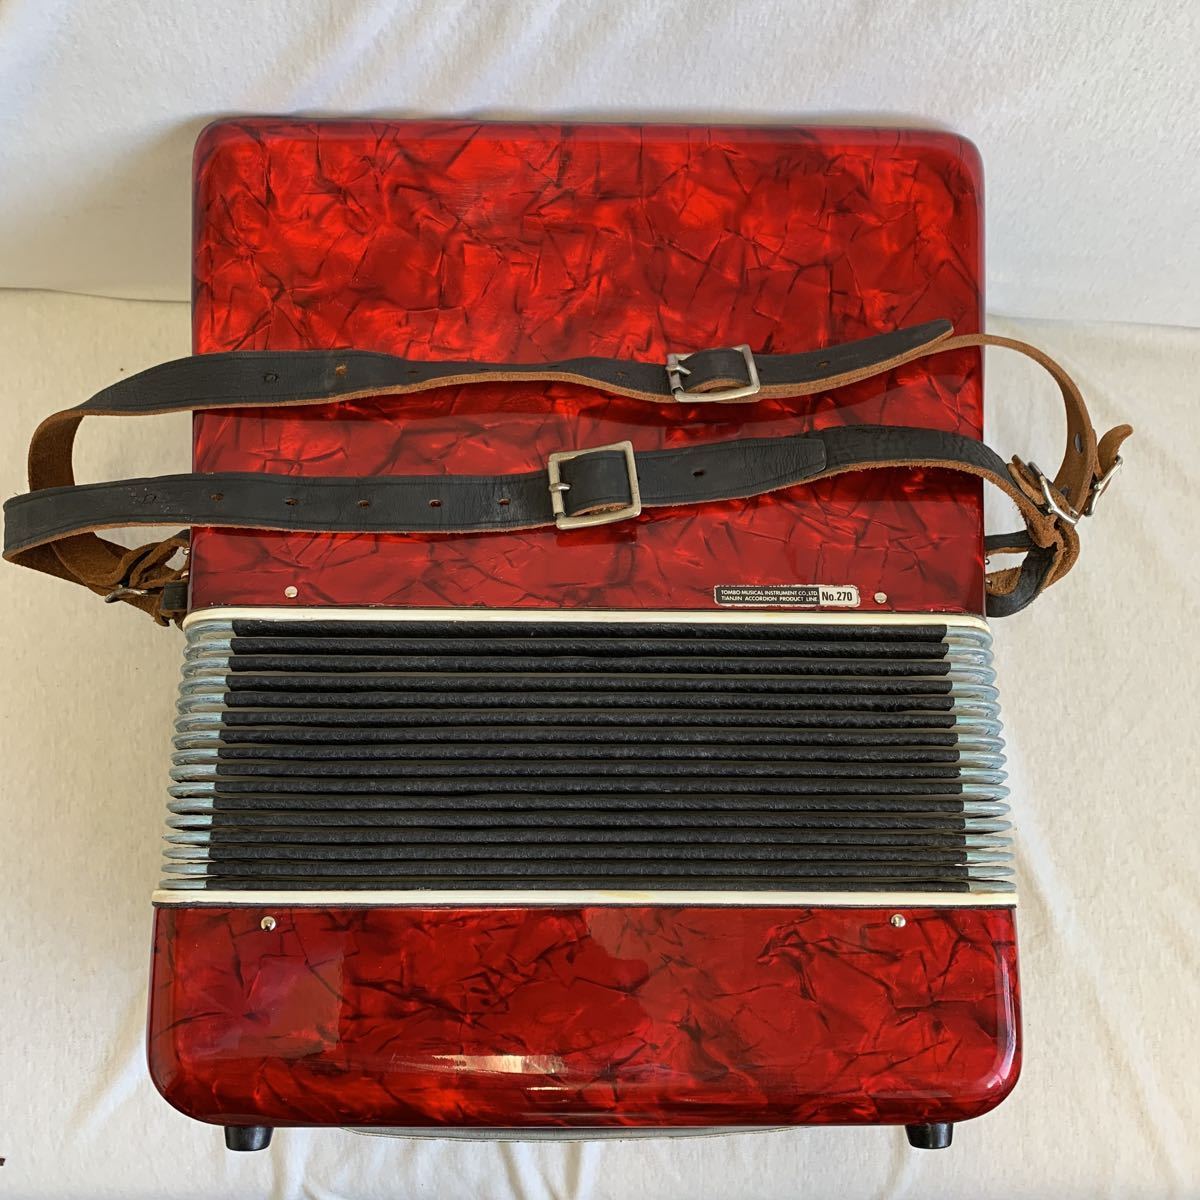  dragonfly TOMBO accordion red SOPRANO moving goods 